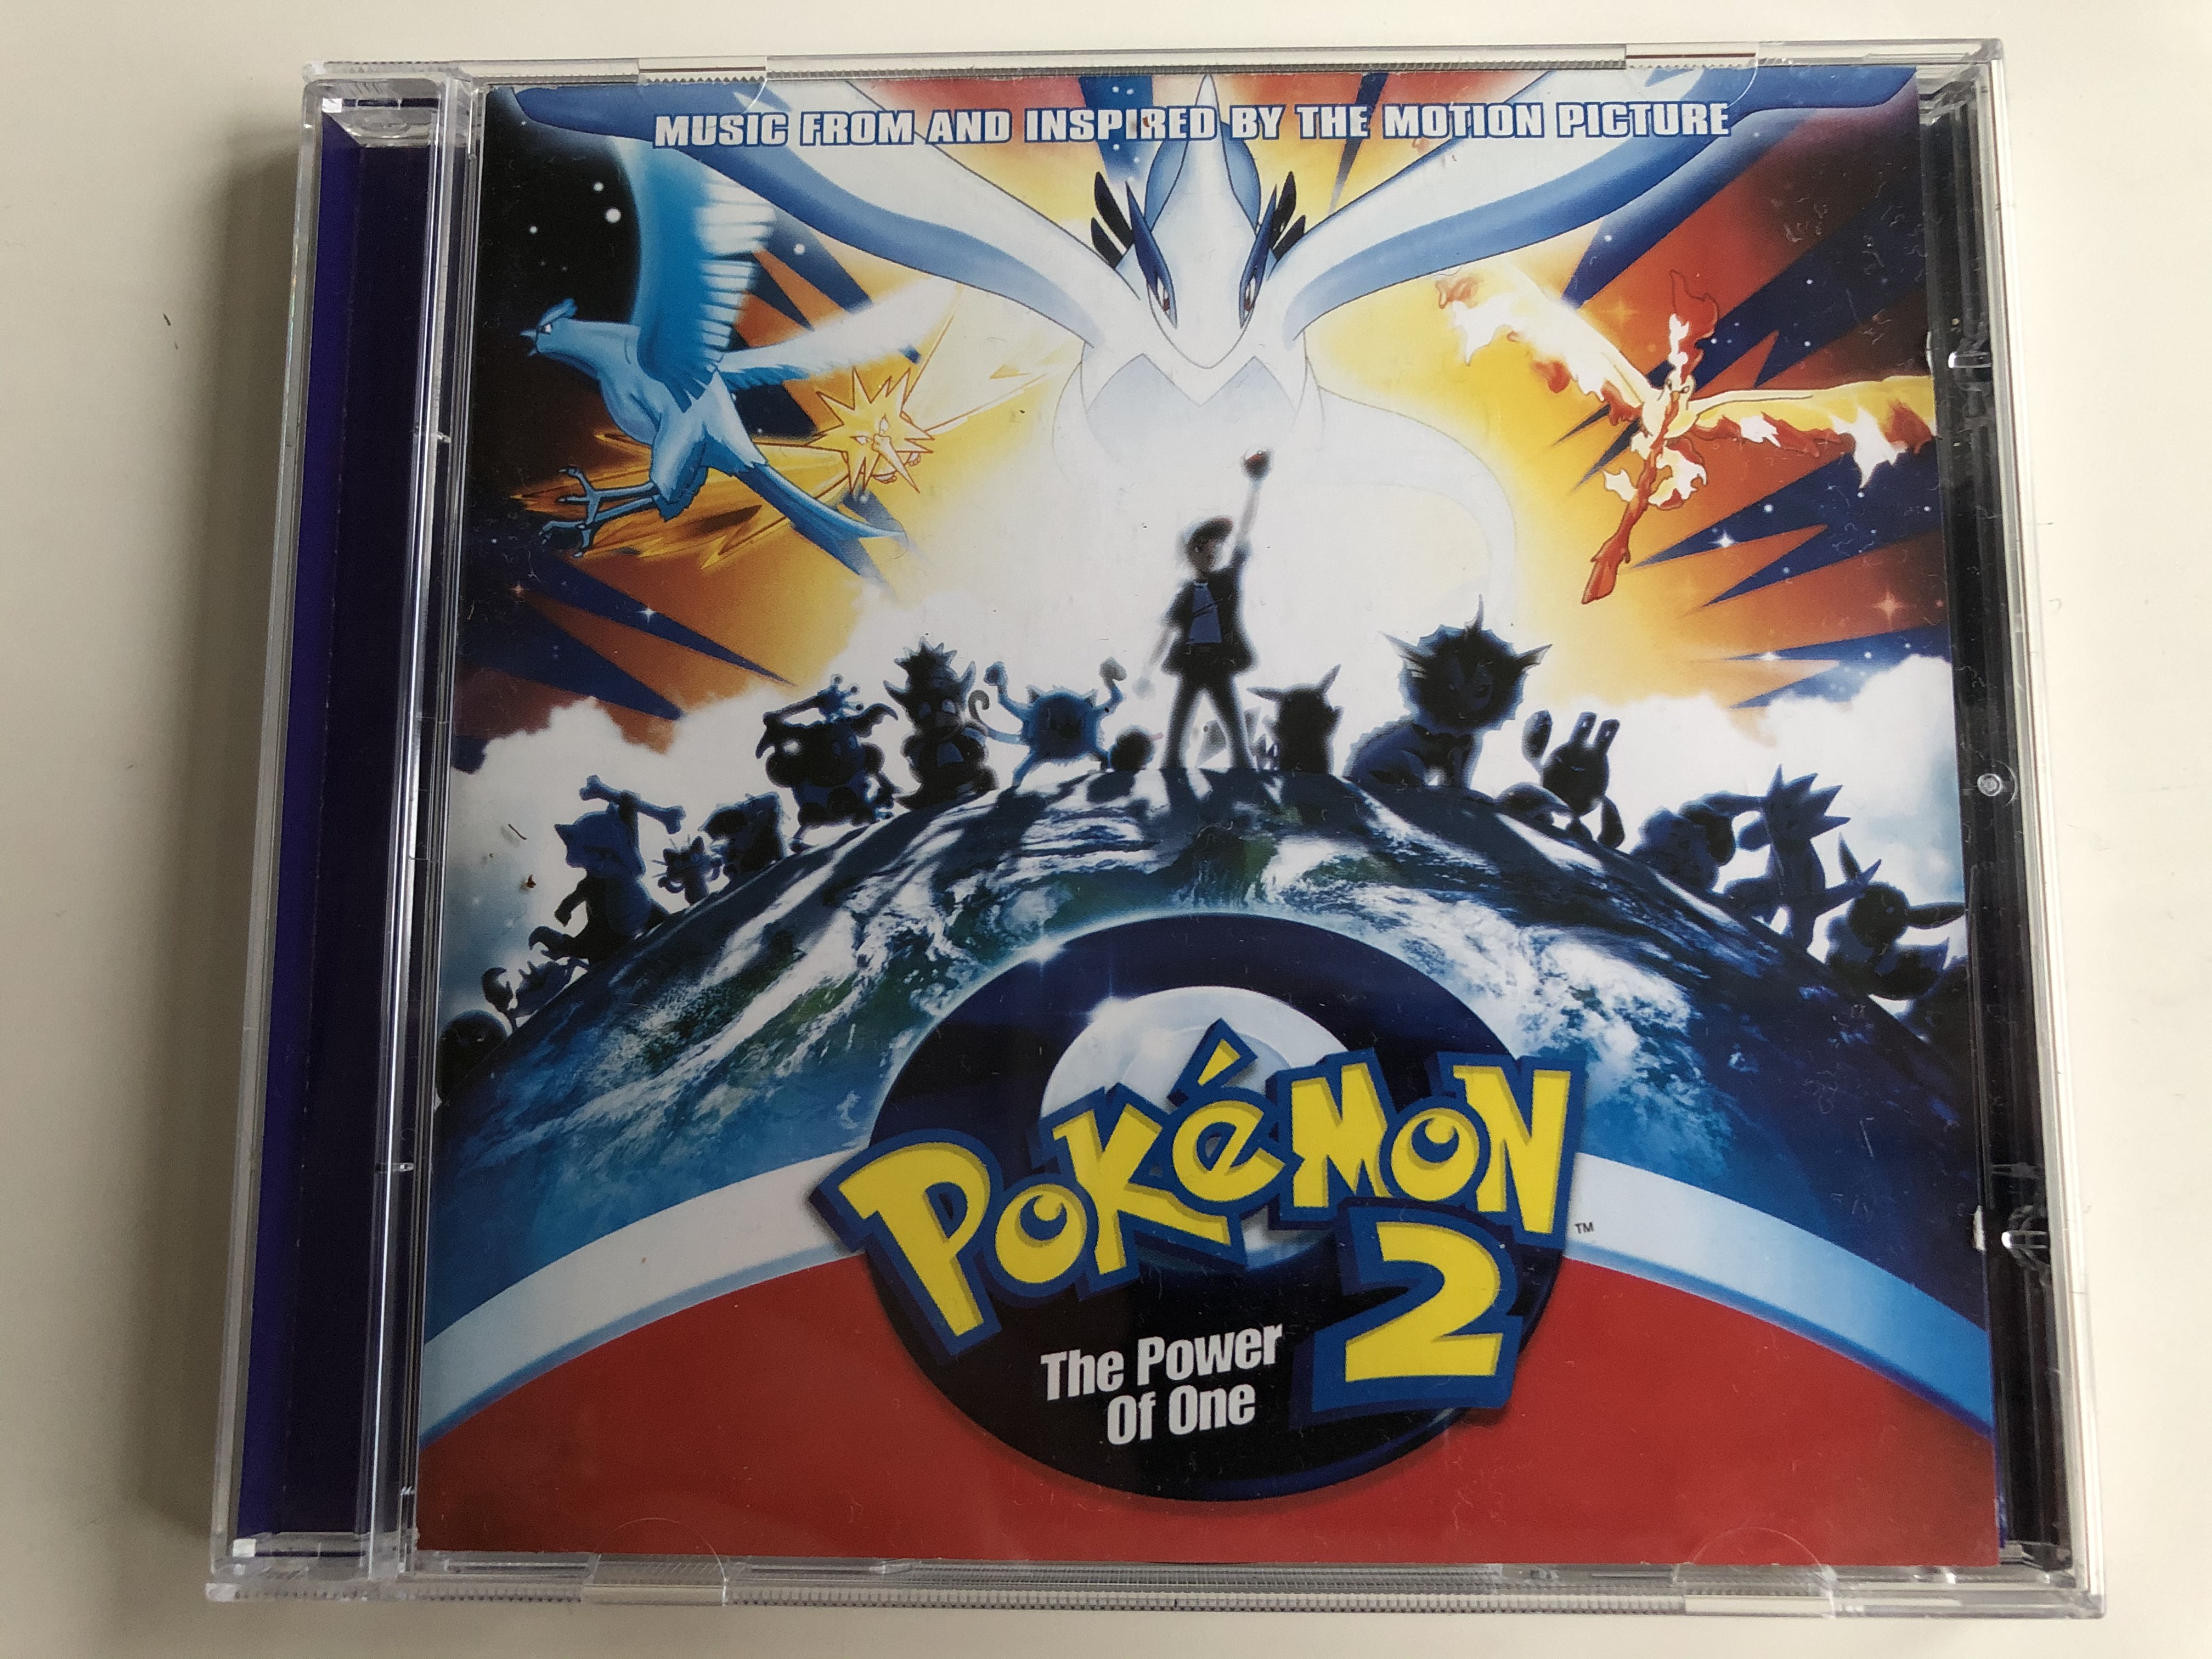 pok-mon-2-the-power-of-one-music-from-and-inspired-by-the-motion-picture-atlantic-audio-cd-2000-7567-83370-2-1-.jpg